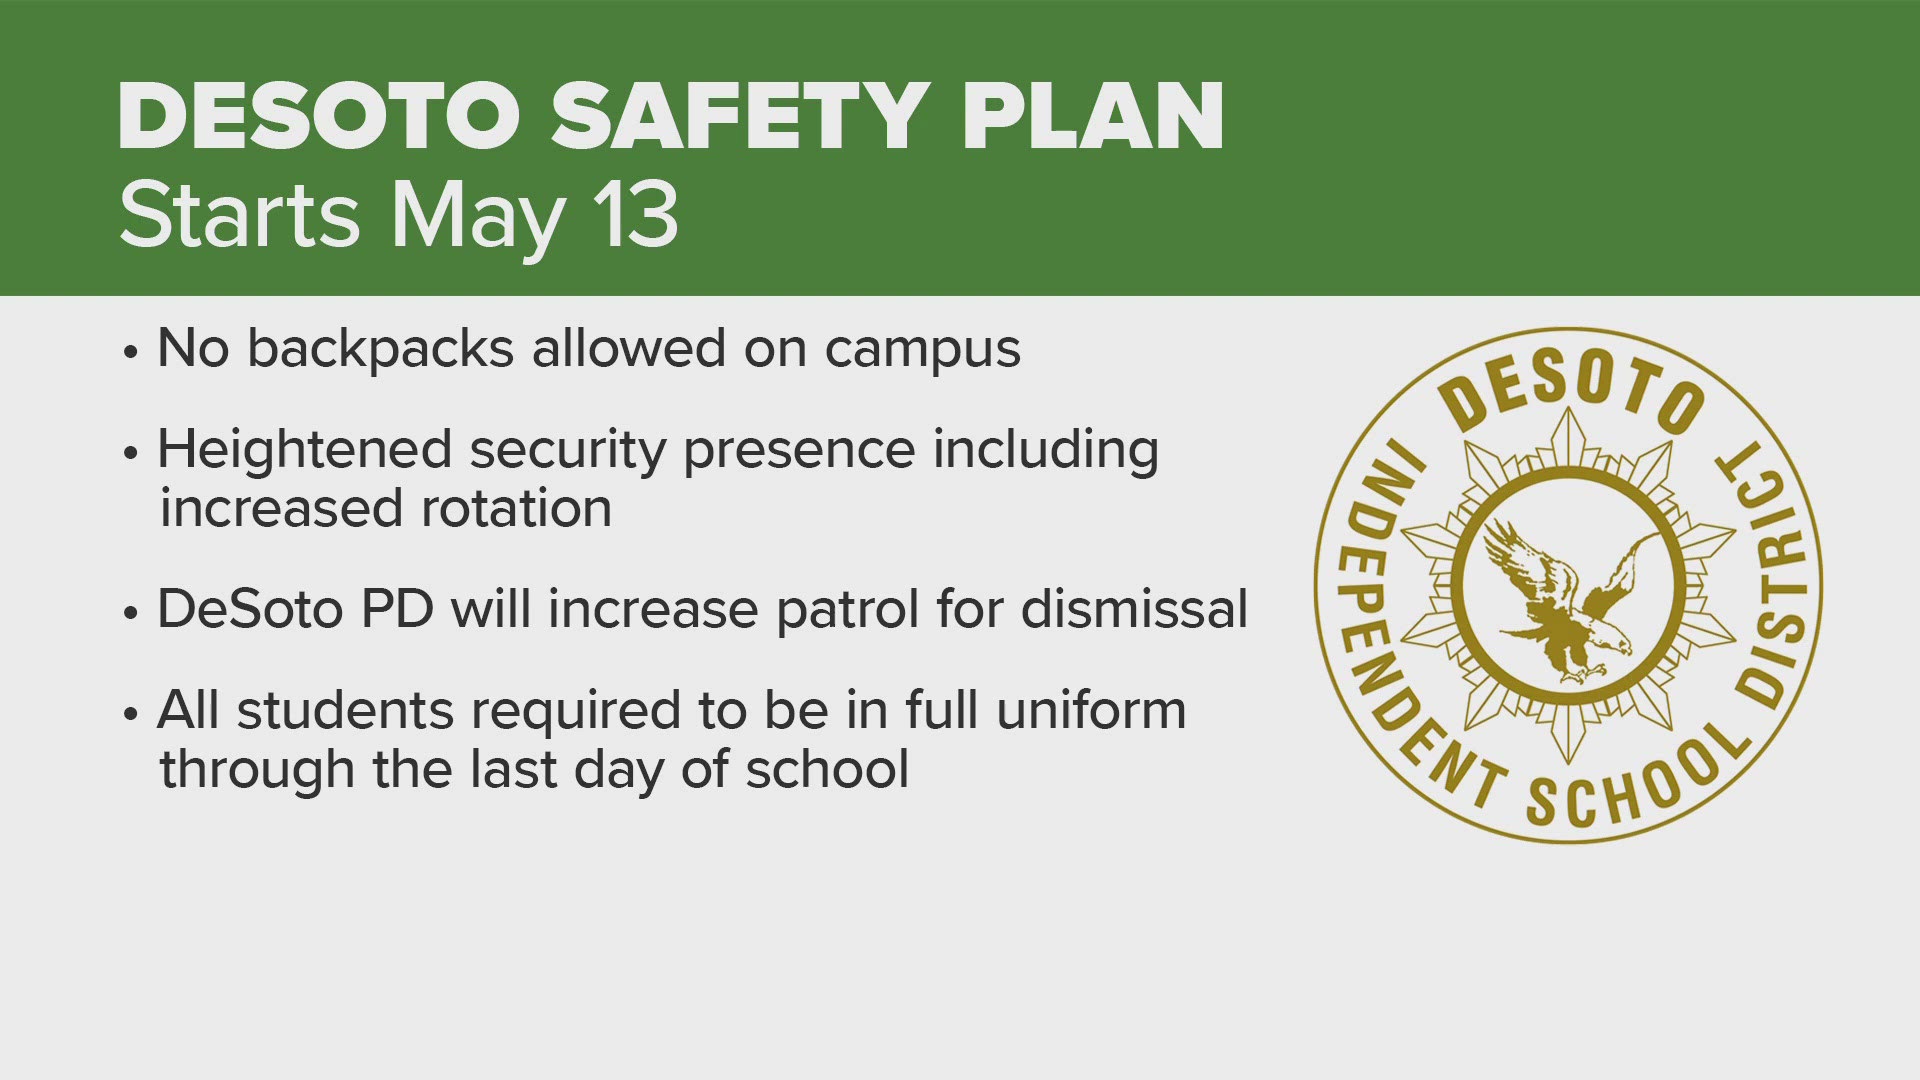 The safety response comes after a teen brought a gun to DeSoto High School.